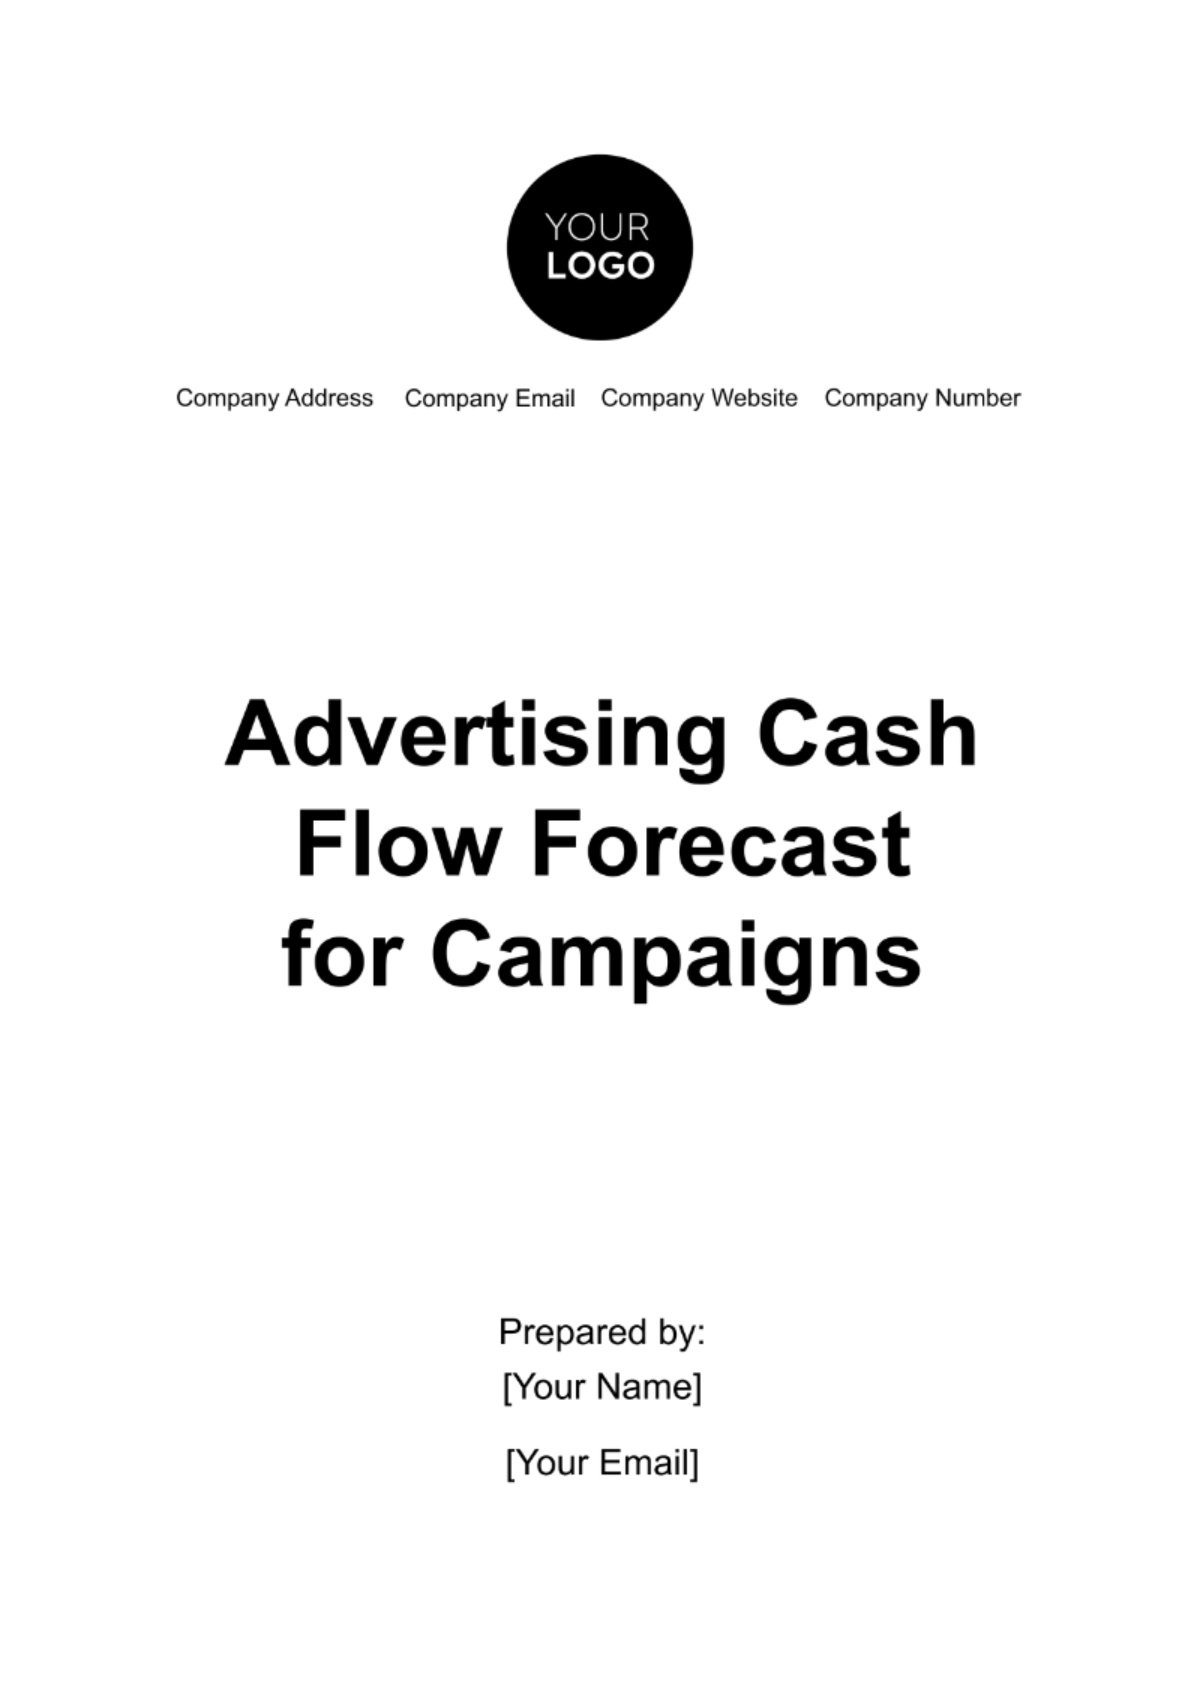 Advertising Cash Flow Forecast for Campaigns Template